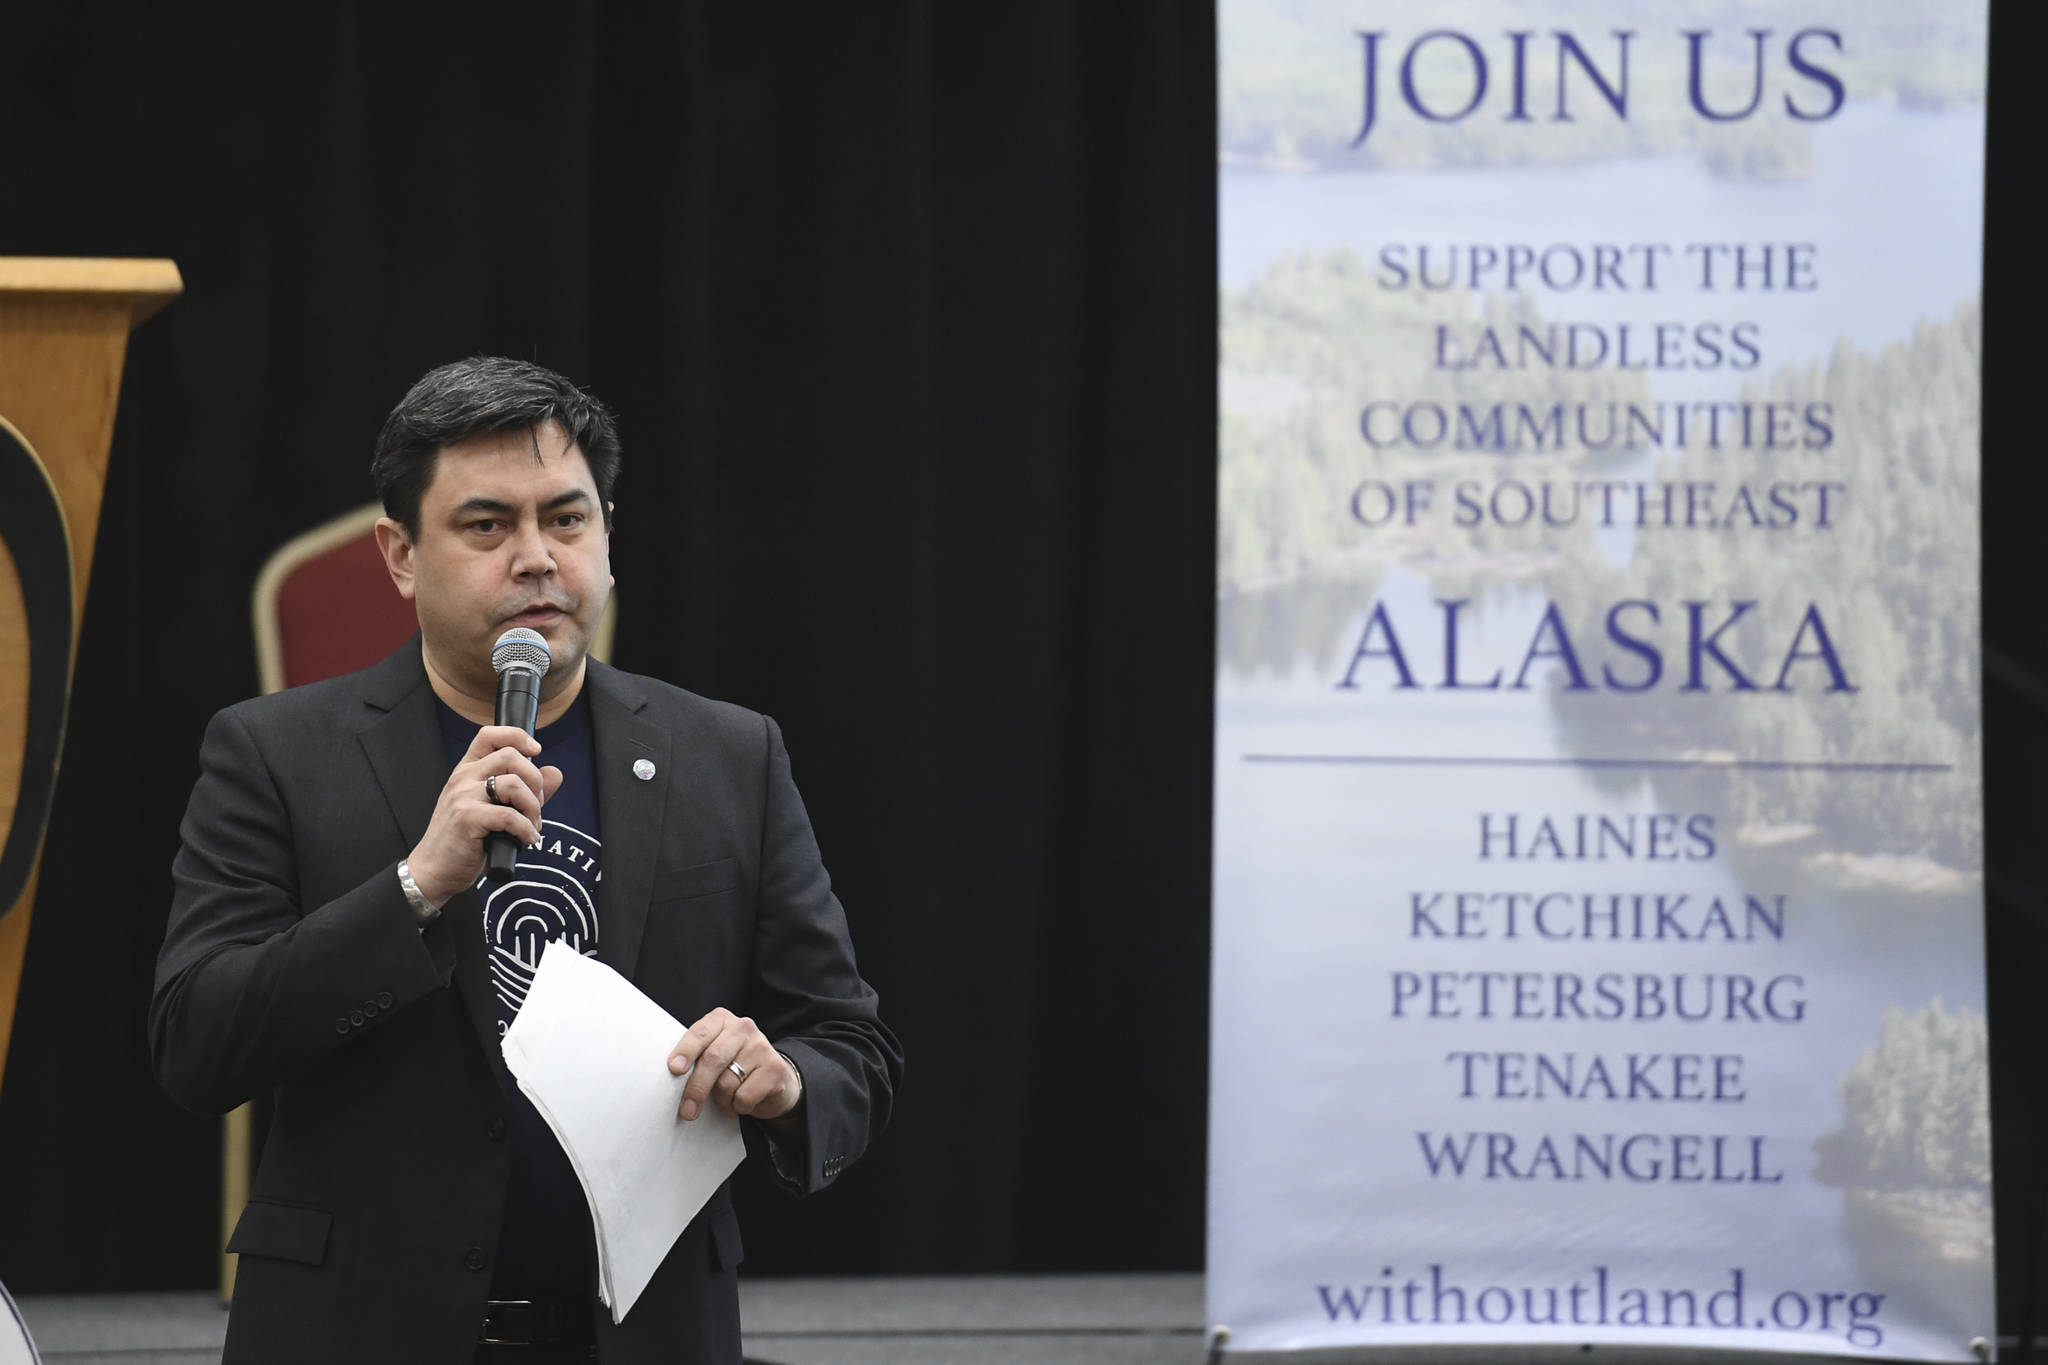 Organizer Todd Antioquia speaks during a presentation about communities left out of the Alaska Native Claims Settlement Act at Elizabeth Peratrovich Hall on Saturday, Dec. 14, 2019. (Michael Penn | Juneau Empire)